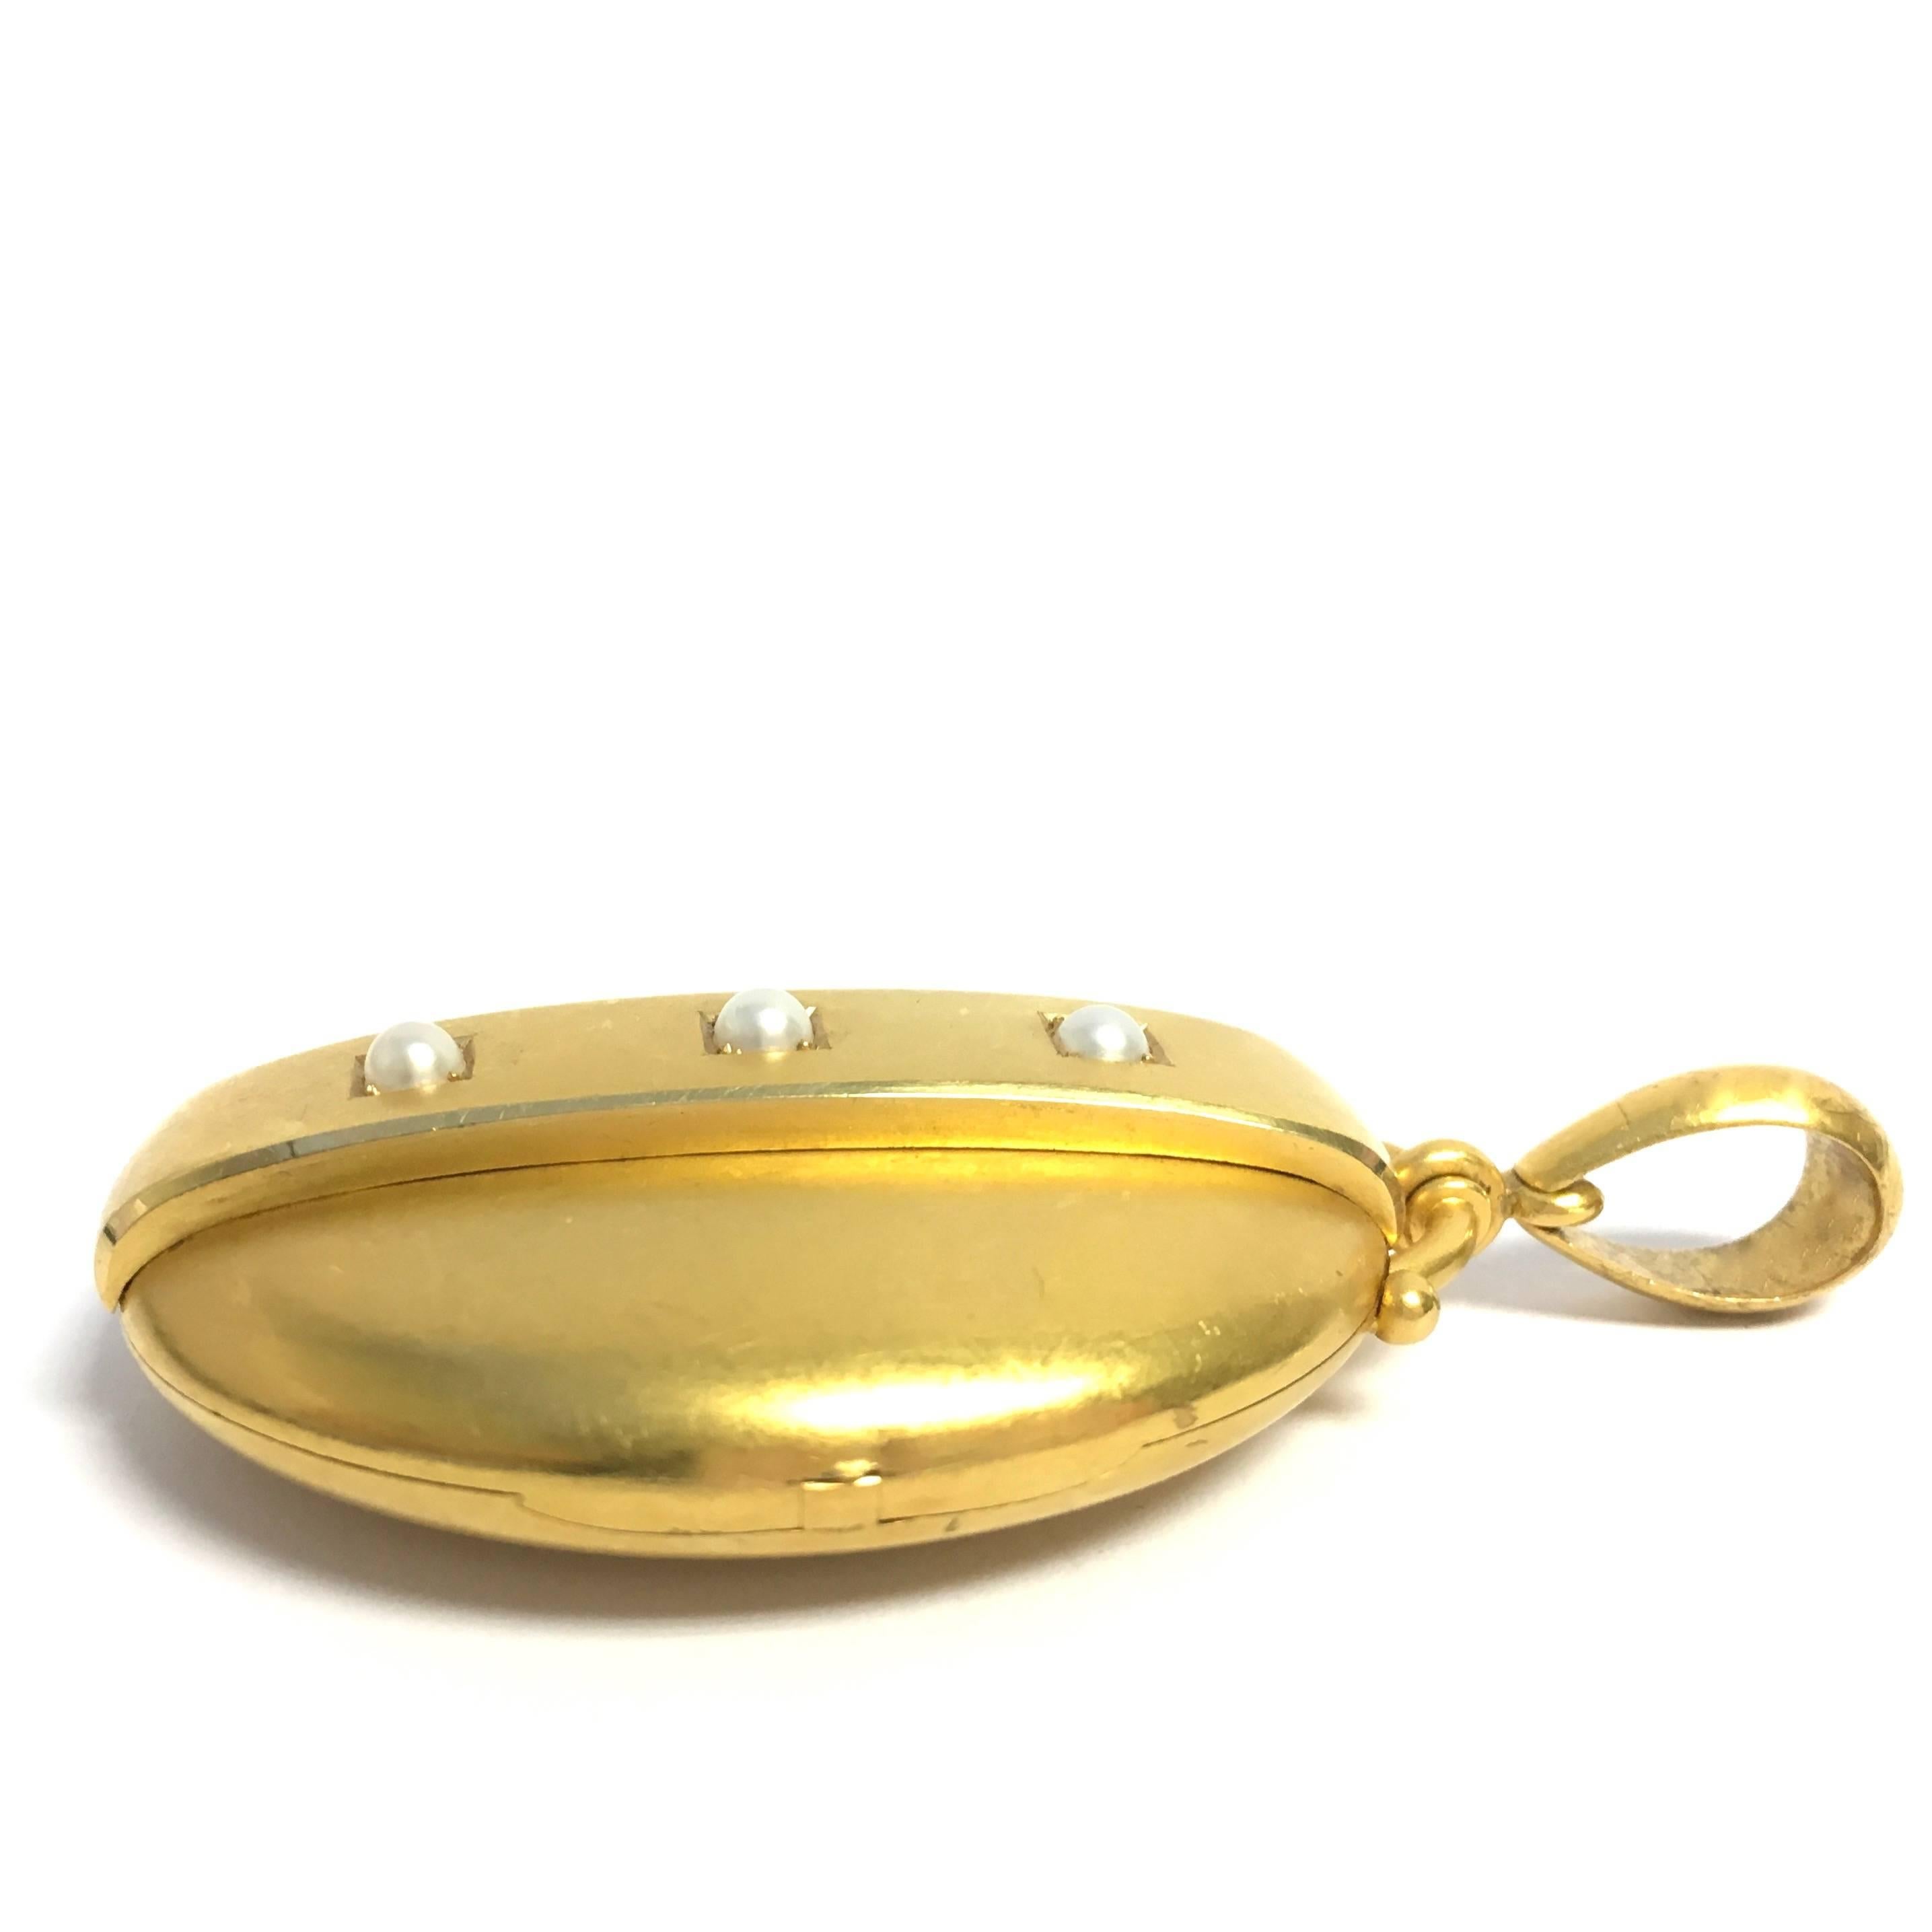 Large Victorian 14K yellow gold pendant featuring three-pearl set raised gold bar on the front. The single hinge design has room for relics or photos. Matte finish throughout. 
Measurements: 2 7/8